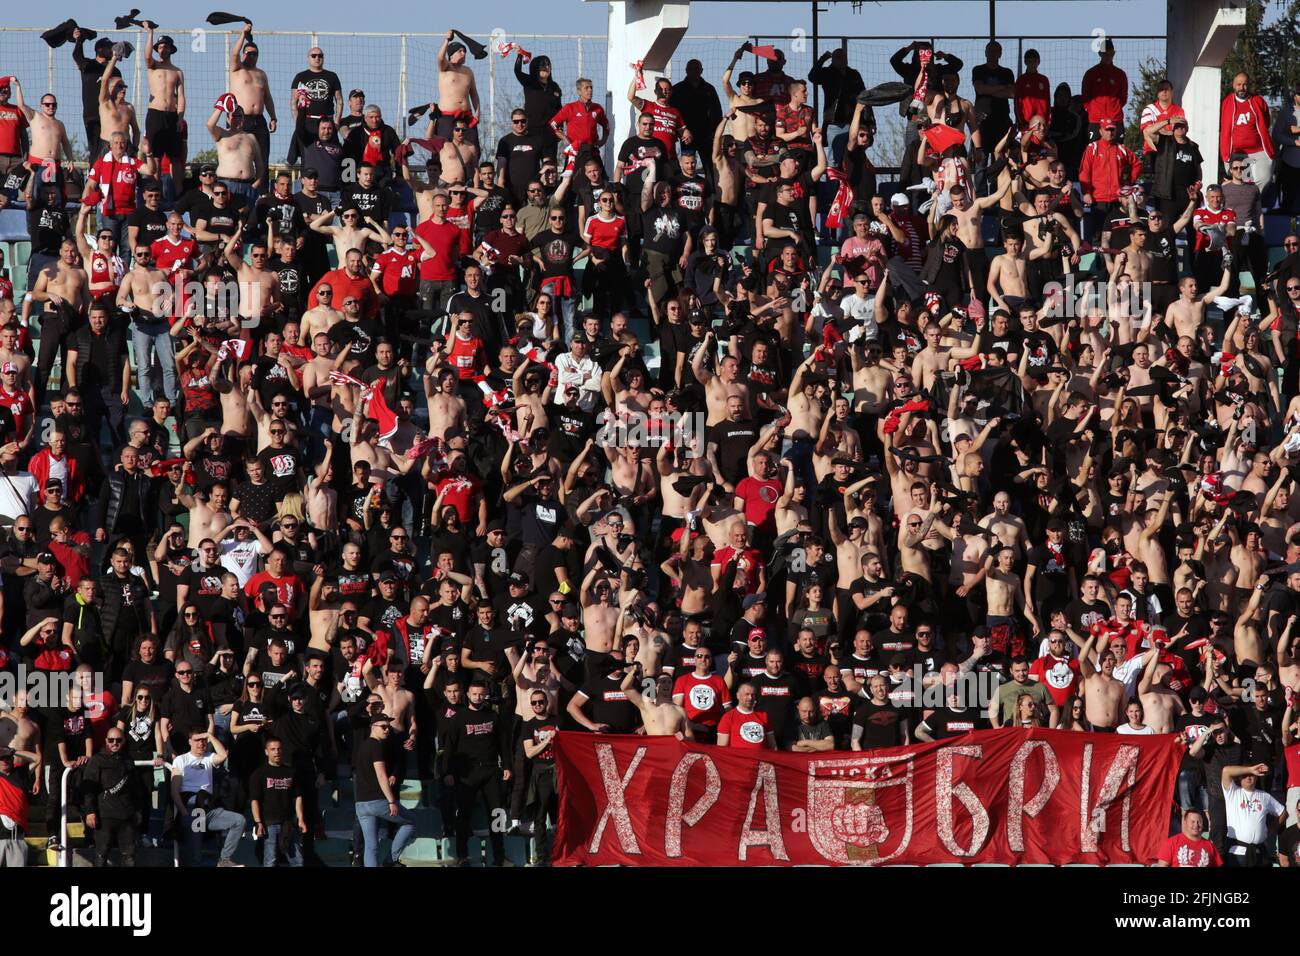 Sofia, Bulgaria: 25 April, 2021: CSKA Sofia's supporters cheer their team during the national championship football match between Levski and CSKA Sofia. Football fans have been allowed to attend the stadium with less than 30% of the seats amidst the coronavirus pandemic. Credit: Pluto/Alamy Live News Stock Photo